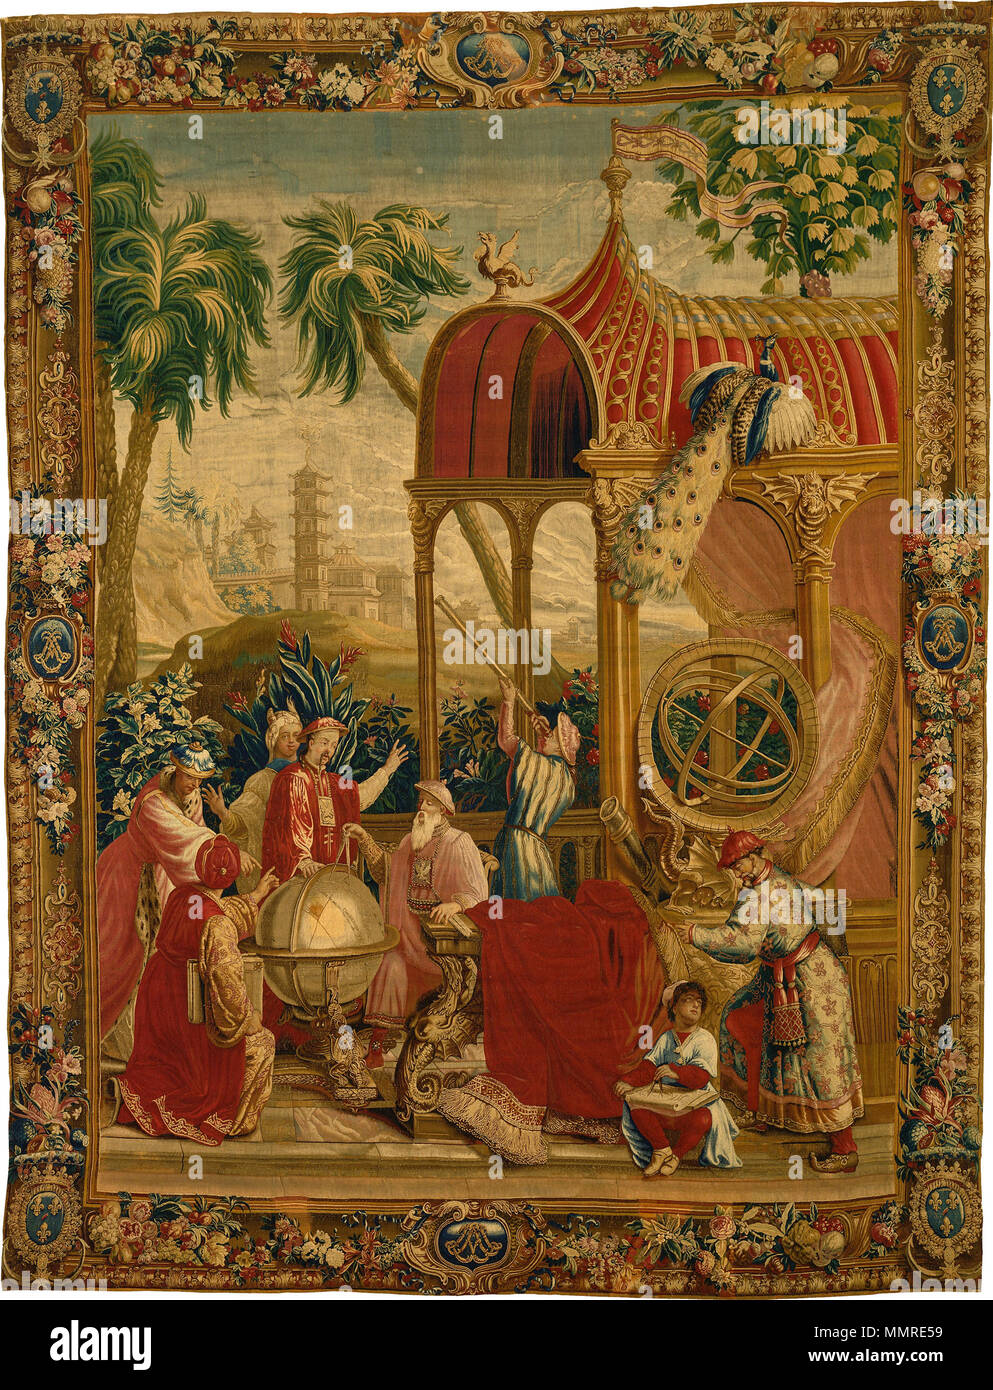 .  English: An late 17th to early 18th century tapestry done by the Beauvais Manufactory depicting Chinese astronomers at the Beijing Ancient Observatory using new more accurate instruments brought to them by Europeans (Jesuits) which were installed in 1644. BeijingObservatoryUpdateTapestry Stock Photo